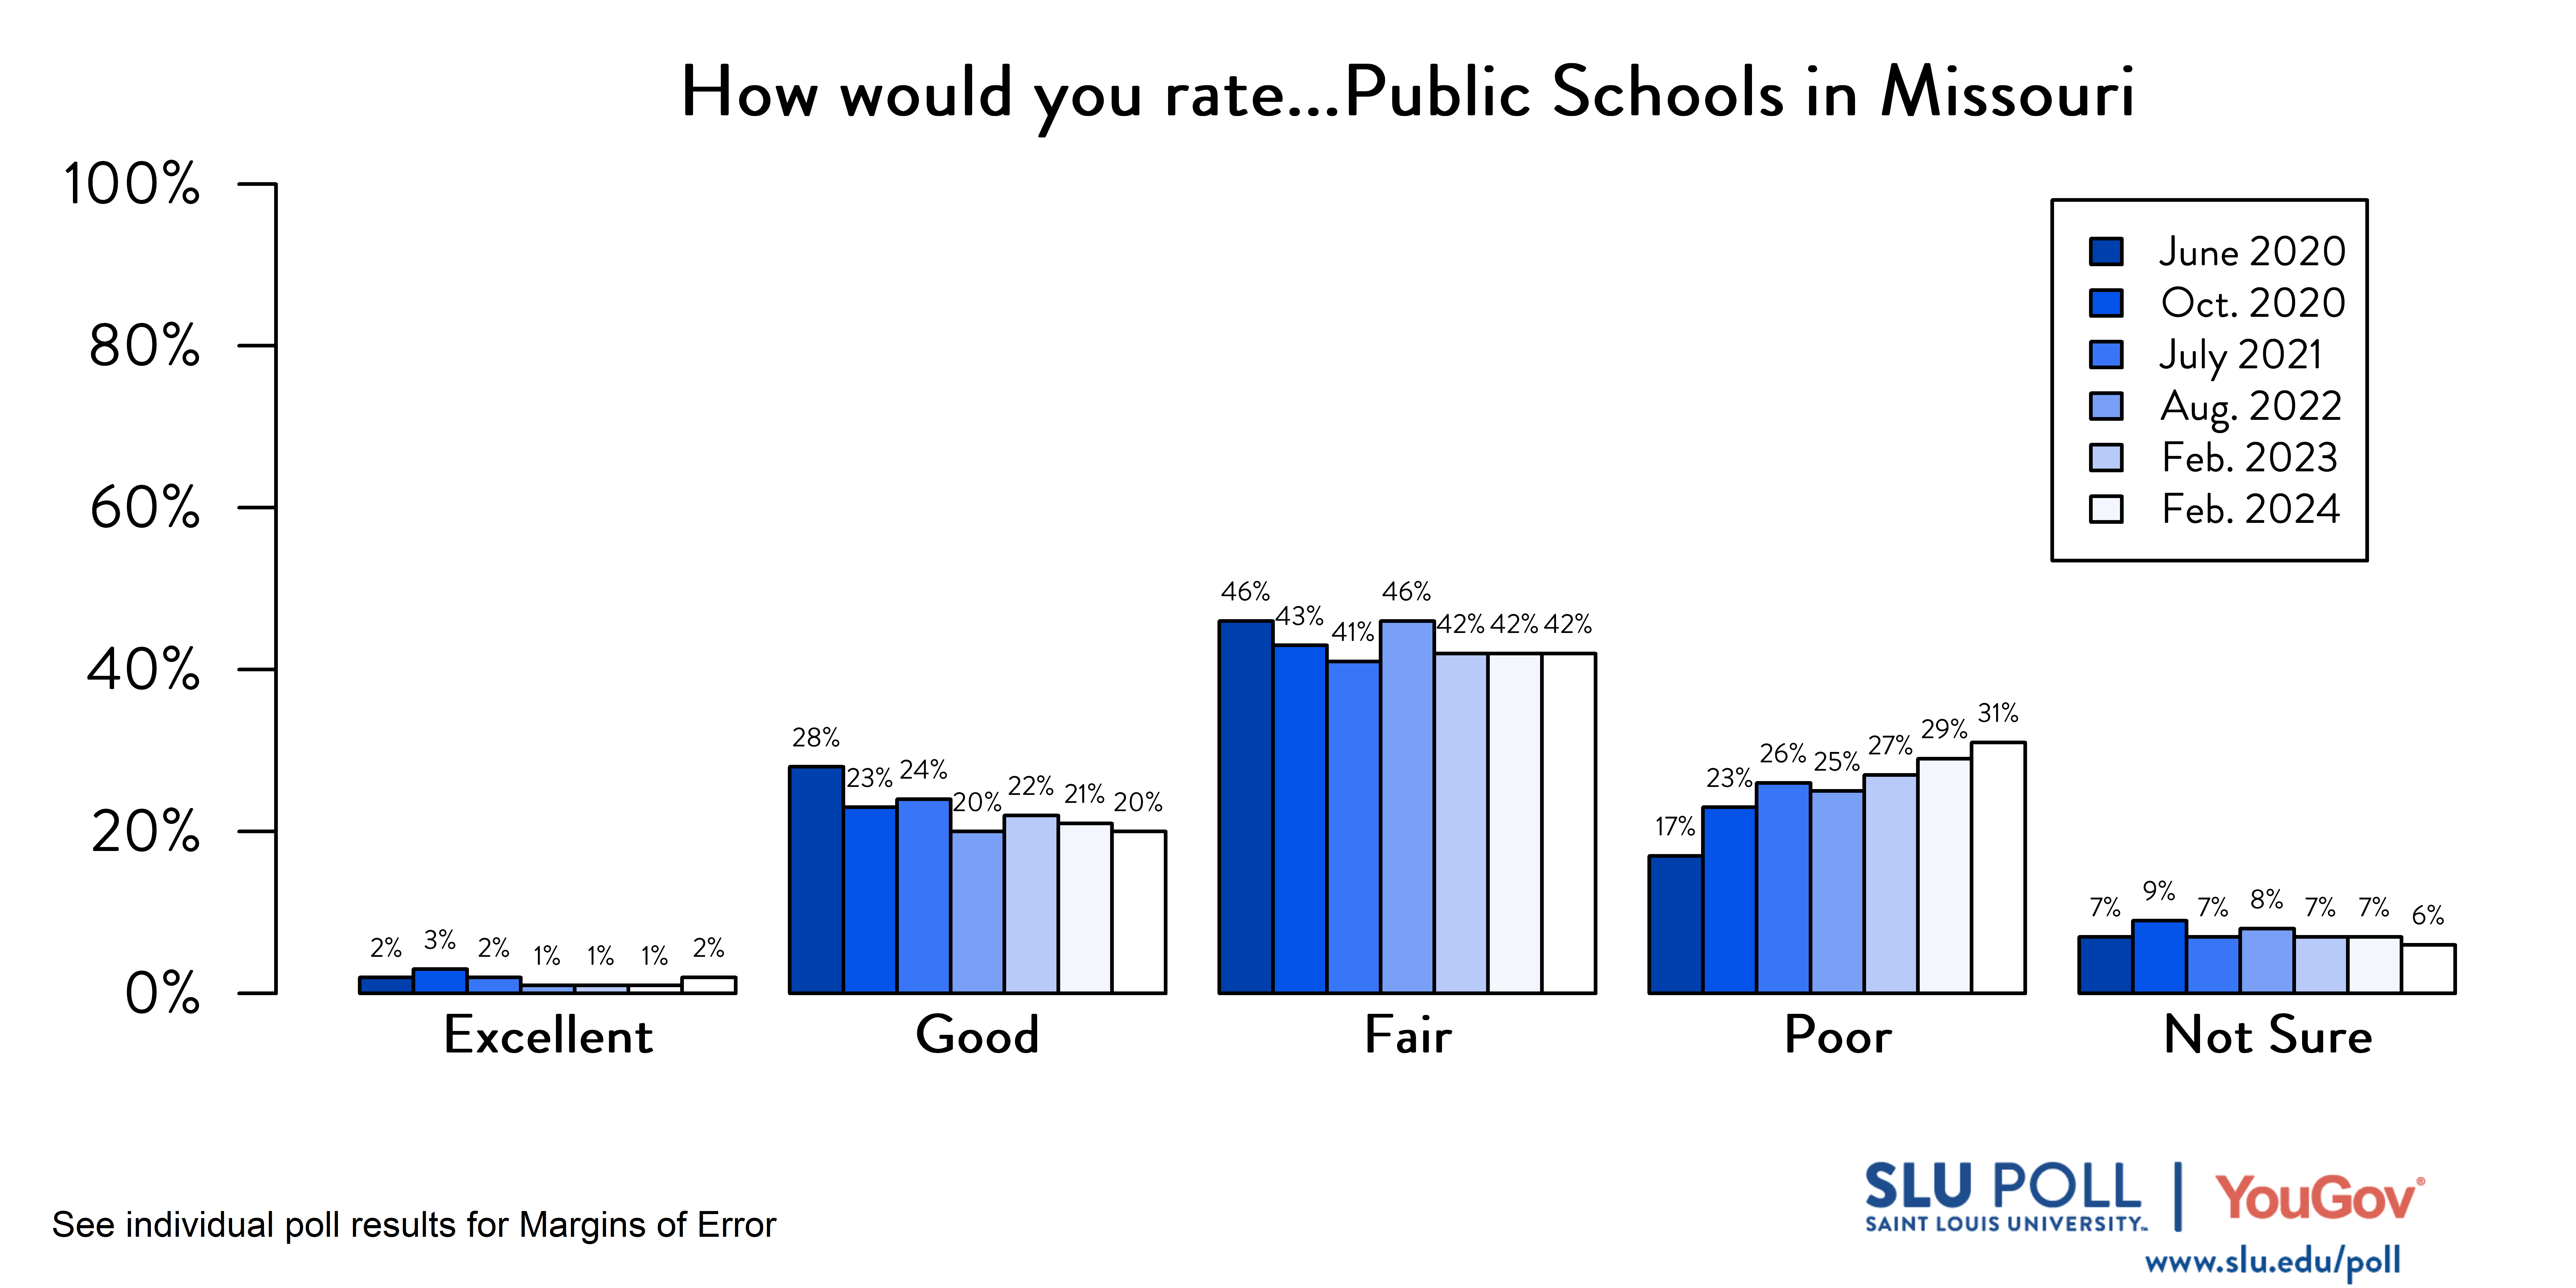 Likely voters' responses to 'How would you rate the condition of the following…Public schools in the State of Missouri?'. June 2020 Voter Responses 2% Excellent, 28% Good, 46% Fair, 17% Poor, and 7% Not Sure. October 2020 Voter Responses: 3% Excellent, 23% Good, 43% Fair, 23% Poor, and 9% Not sure. July 2021 Voter Responses: 2% Excellent, 24% Good, 41% Fair, 26% Poor, and 7% Not sure. August 2022 Voter Responses: 1% Excellent, 20% Good, 46% Fair, 25% Poor, and 8% Not sure. February 2023 Voter Responses: 1% Excellent, 22% Good, 42% Fair, 27% Poor, and 7% Not sure. February 2024 Voter Responses: 2% Excellent, 20% Good, 42% Fair, 31% Poor, and 6% Not sure.